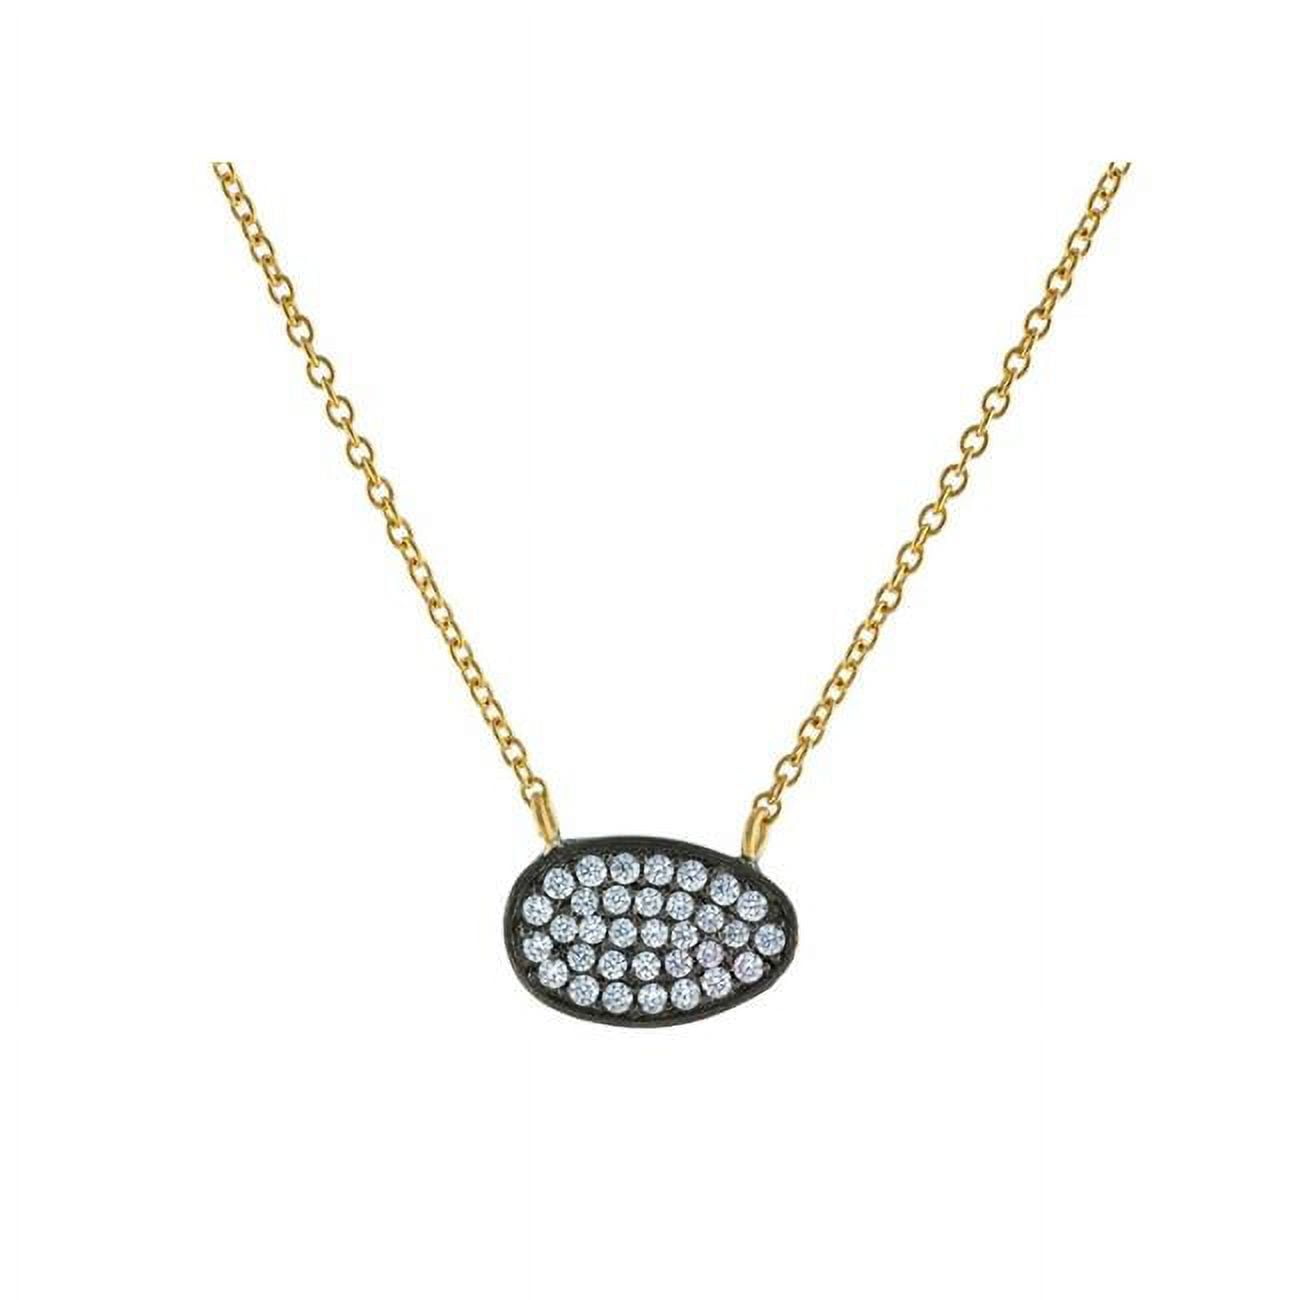 211596gb 16 In. Plus 2 In. Extension Silver Black Rhodium & Gold Plated Chain, Cubic Zirconia Irregular Oval Shape Pendant Necklace